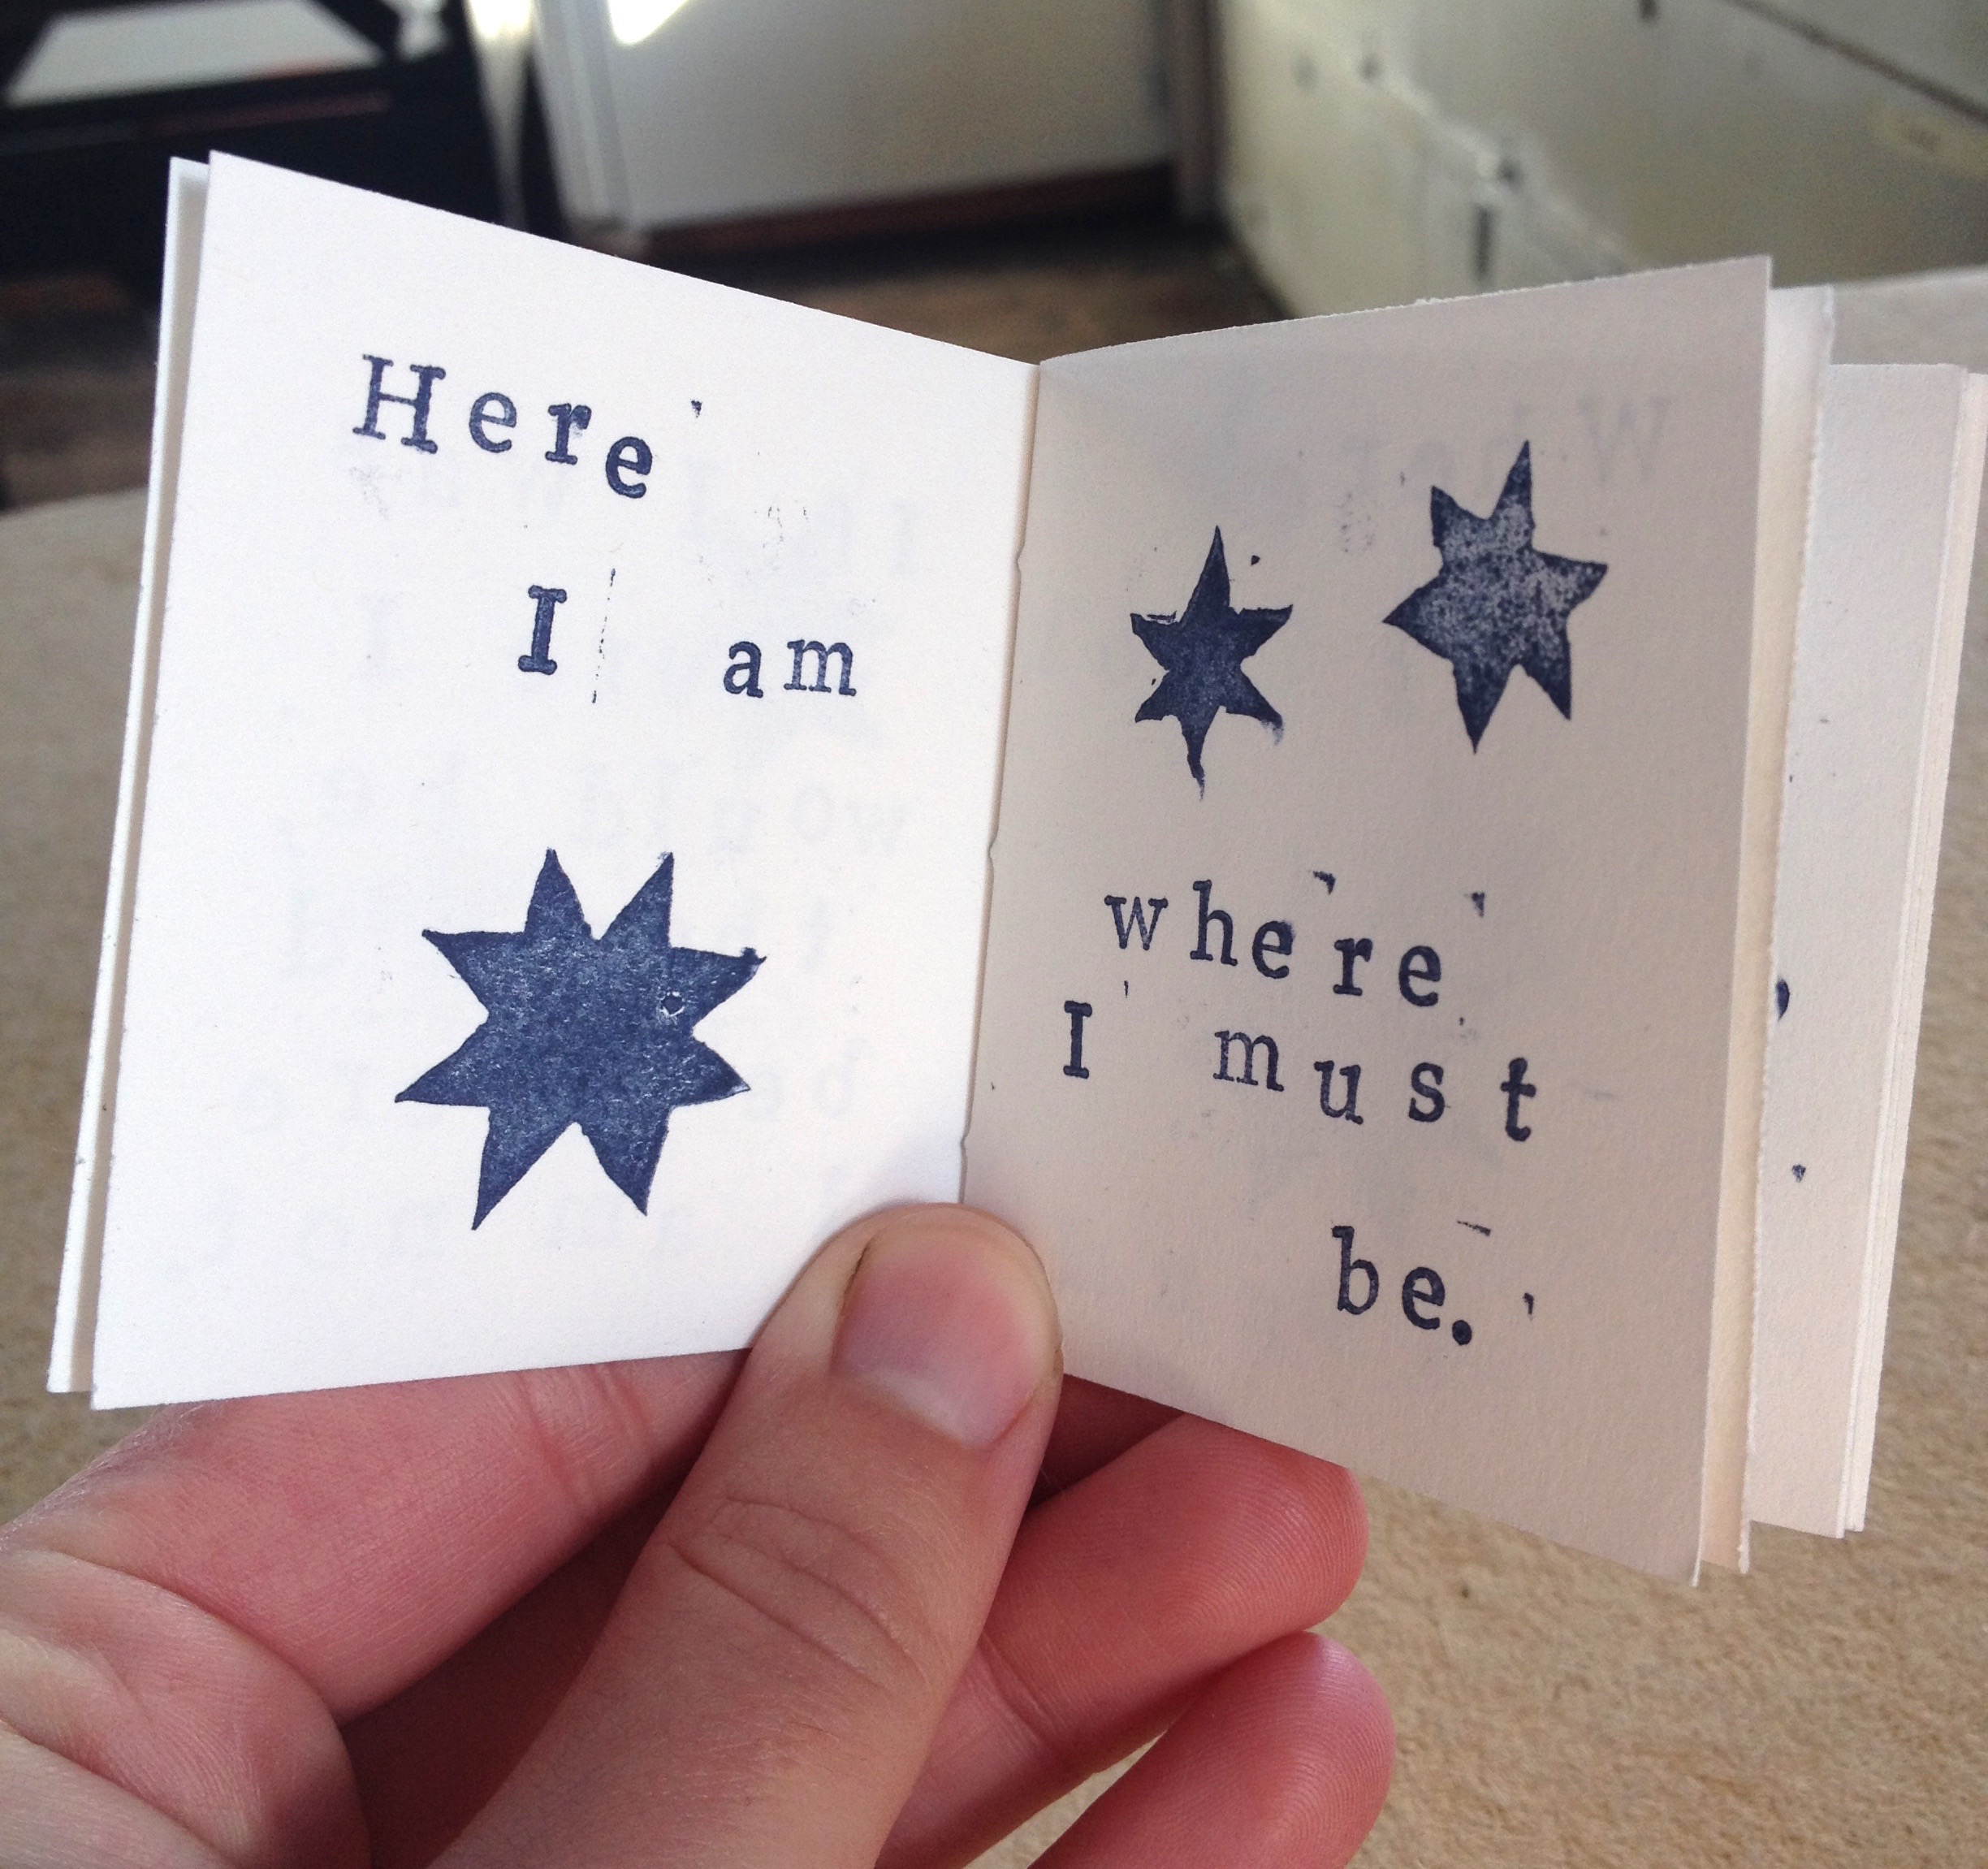 View of an opened zine featuring stamped text and star shapes